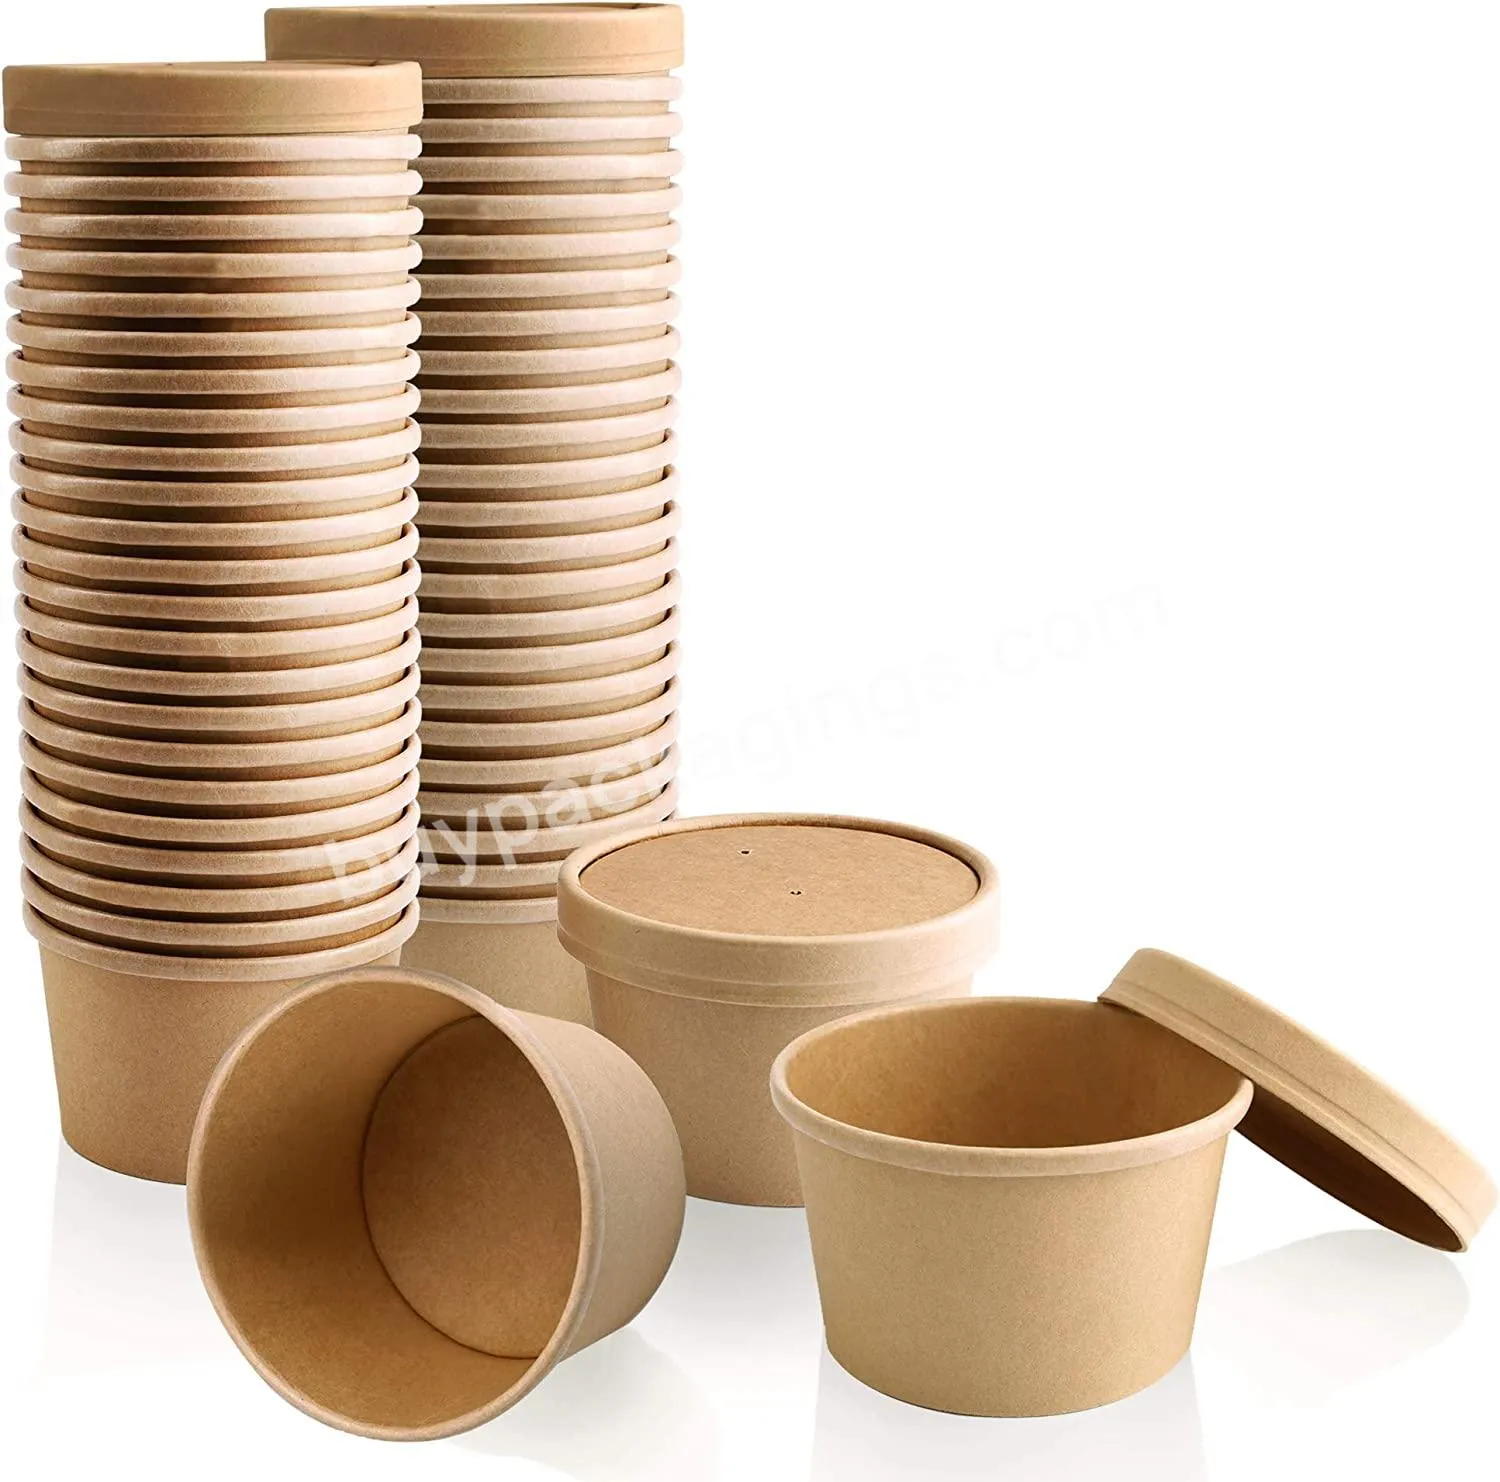 Hot Selling Compostable Bowls 12oz Disposable Paper Bowls,Biodegradable Soup Bowls Made Of Natural Paper - Buy Hot Selling Compostable Bowls 12oz Disposable Paper Bowls Biodegradable Soup Bowls Made Of Natural Paper,Biodegradable Soup Bowls Made Of N